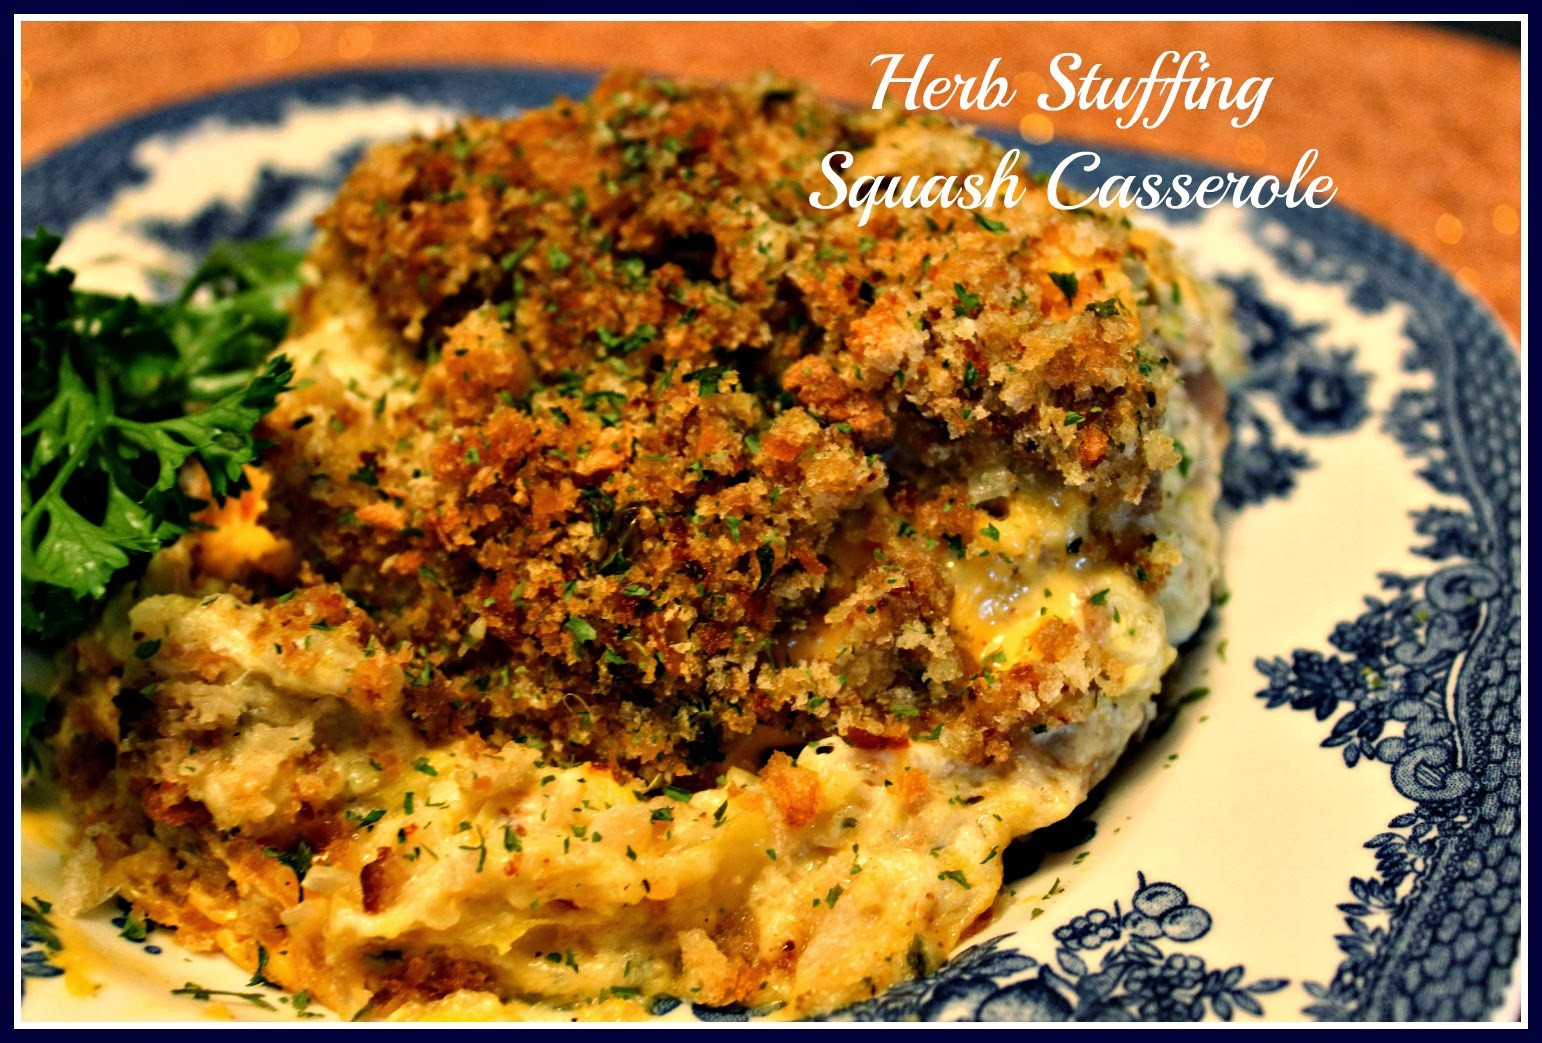 Squash Casserole With Stuffing
 Sweet Tea and Cornbread Herb Stuffing Squash Casserole